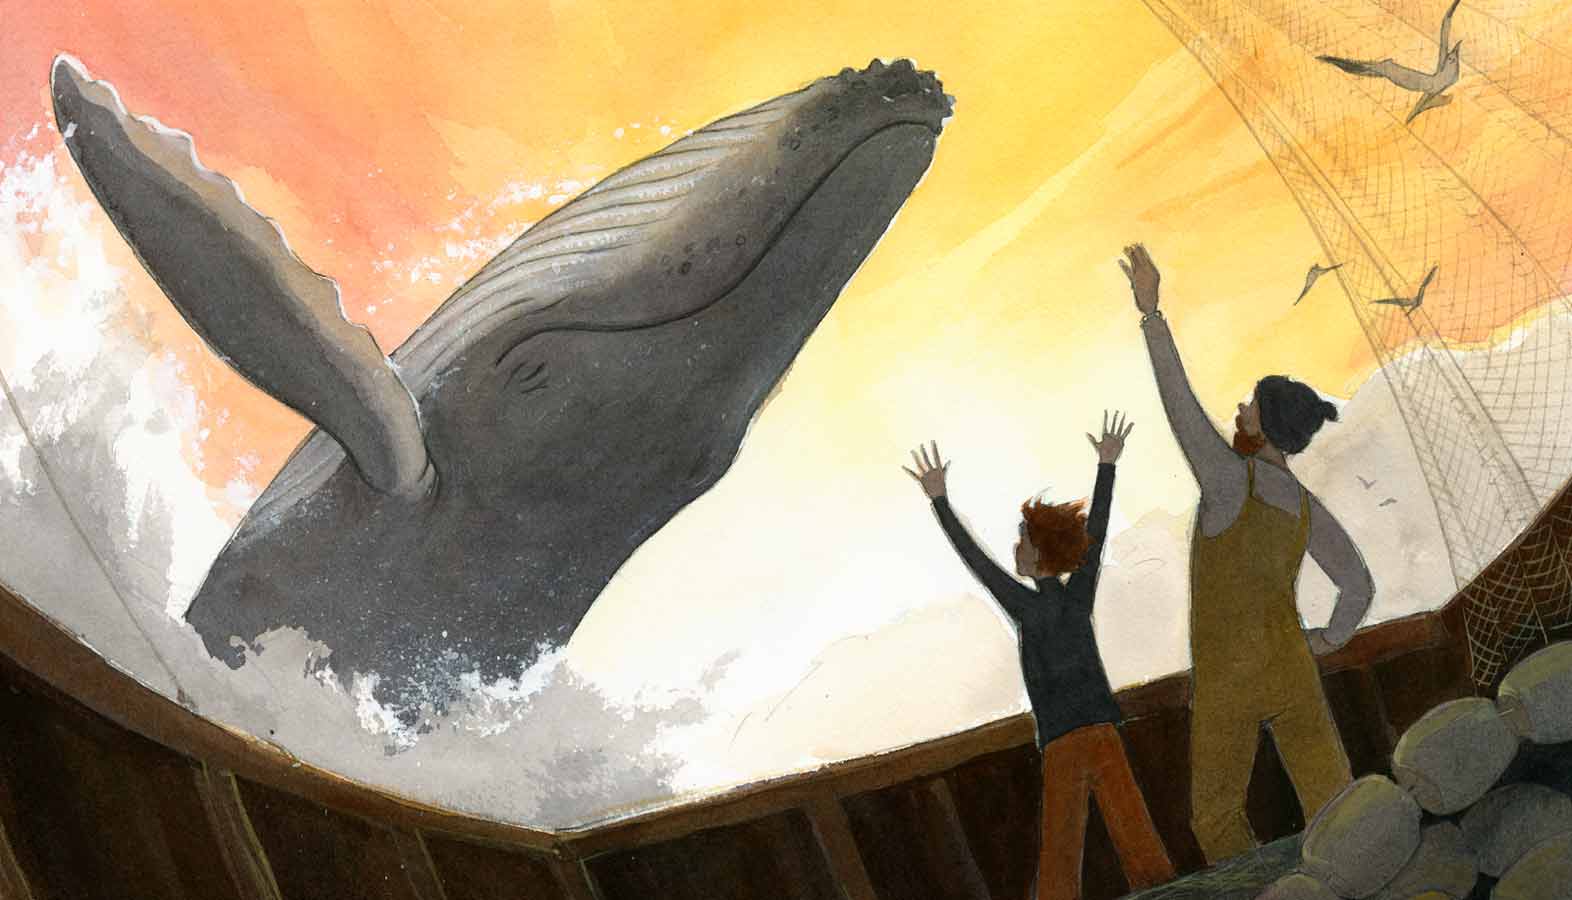 Watercolor illustration from the picture book 'The Fisherman and the Whale' showing a large humpback whale breaching out of the ocean in front of a gold and orange sunset shy with a man and boy waving from their boat in the foreground.